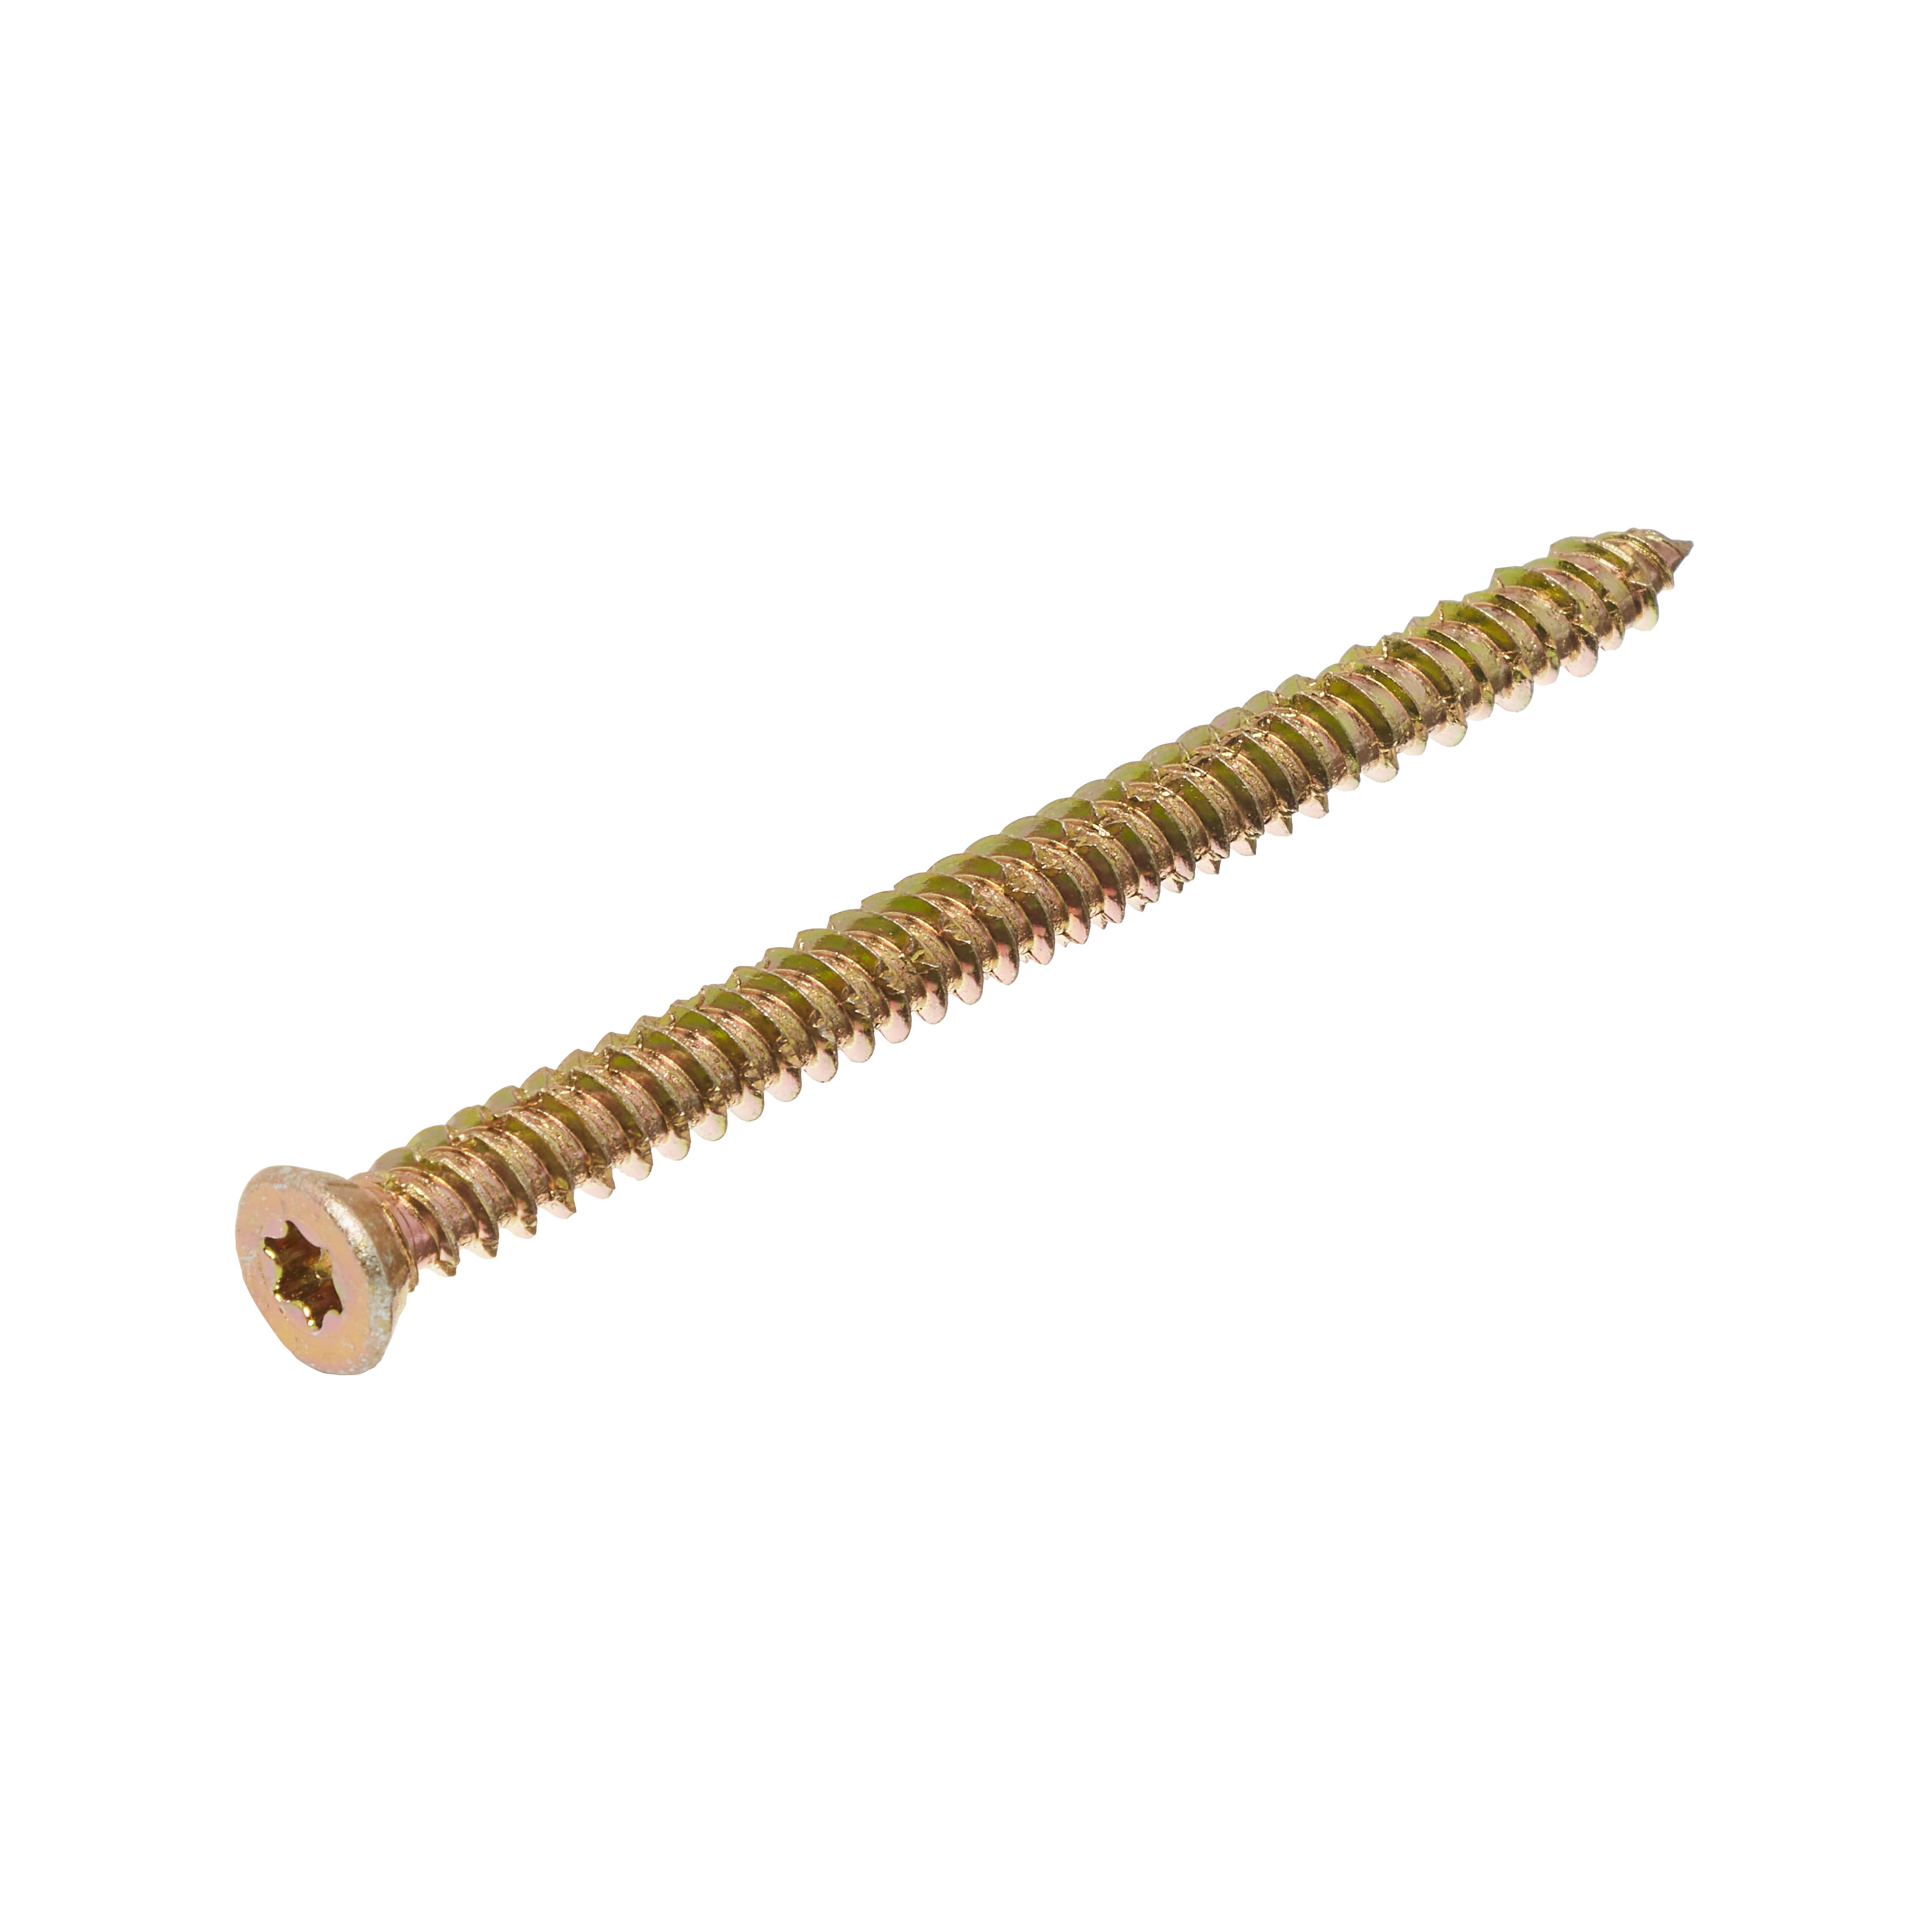 Easydrive TX Countersunk Zinc-plated Steel Screw (Dia)7.5mm (L)100mm, Pack of 100